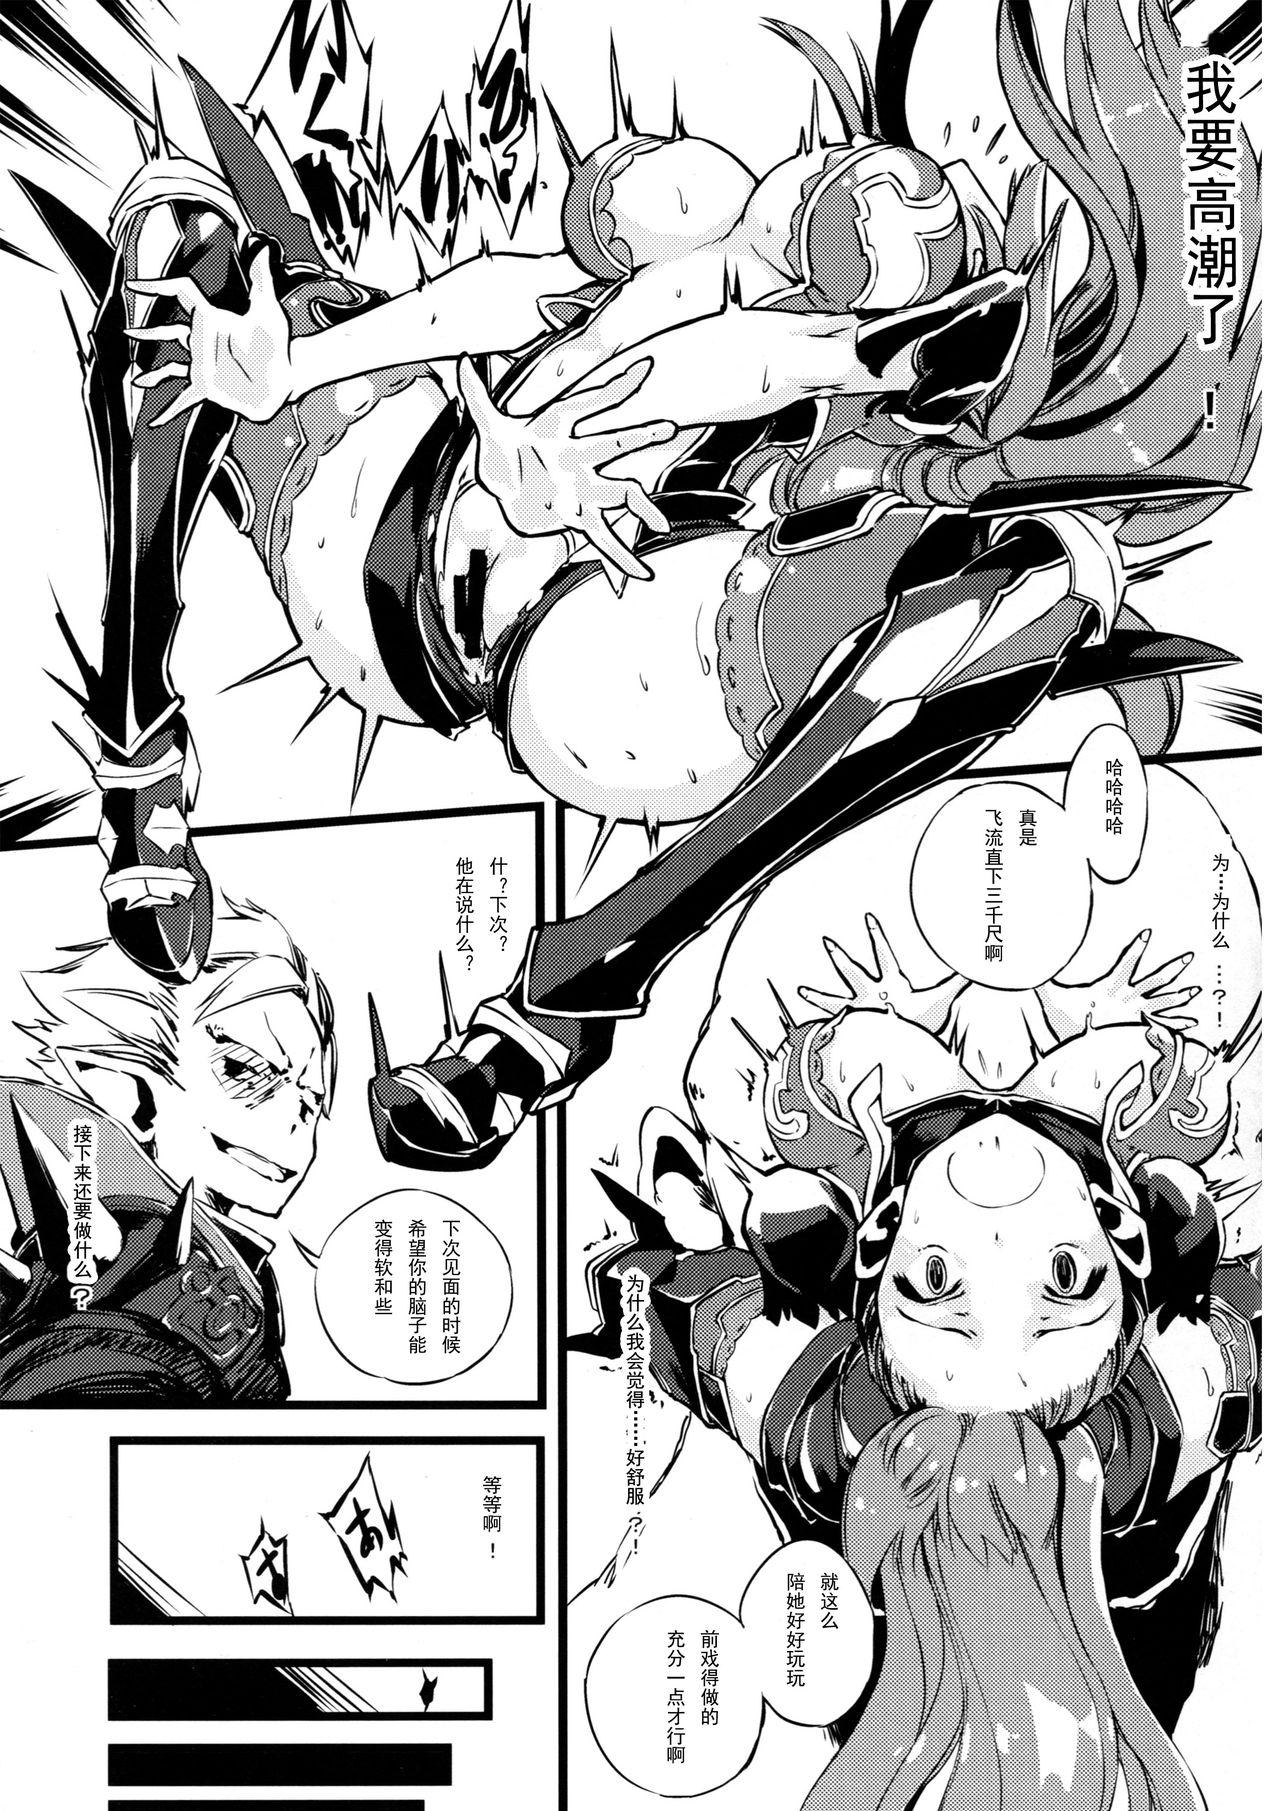 Argentina Bad End Catharsis Vol.3 - Granblue fantasy Farting - Page 6